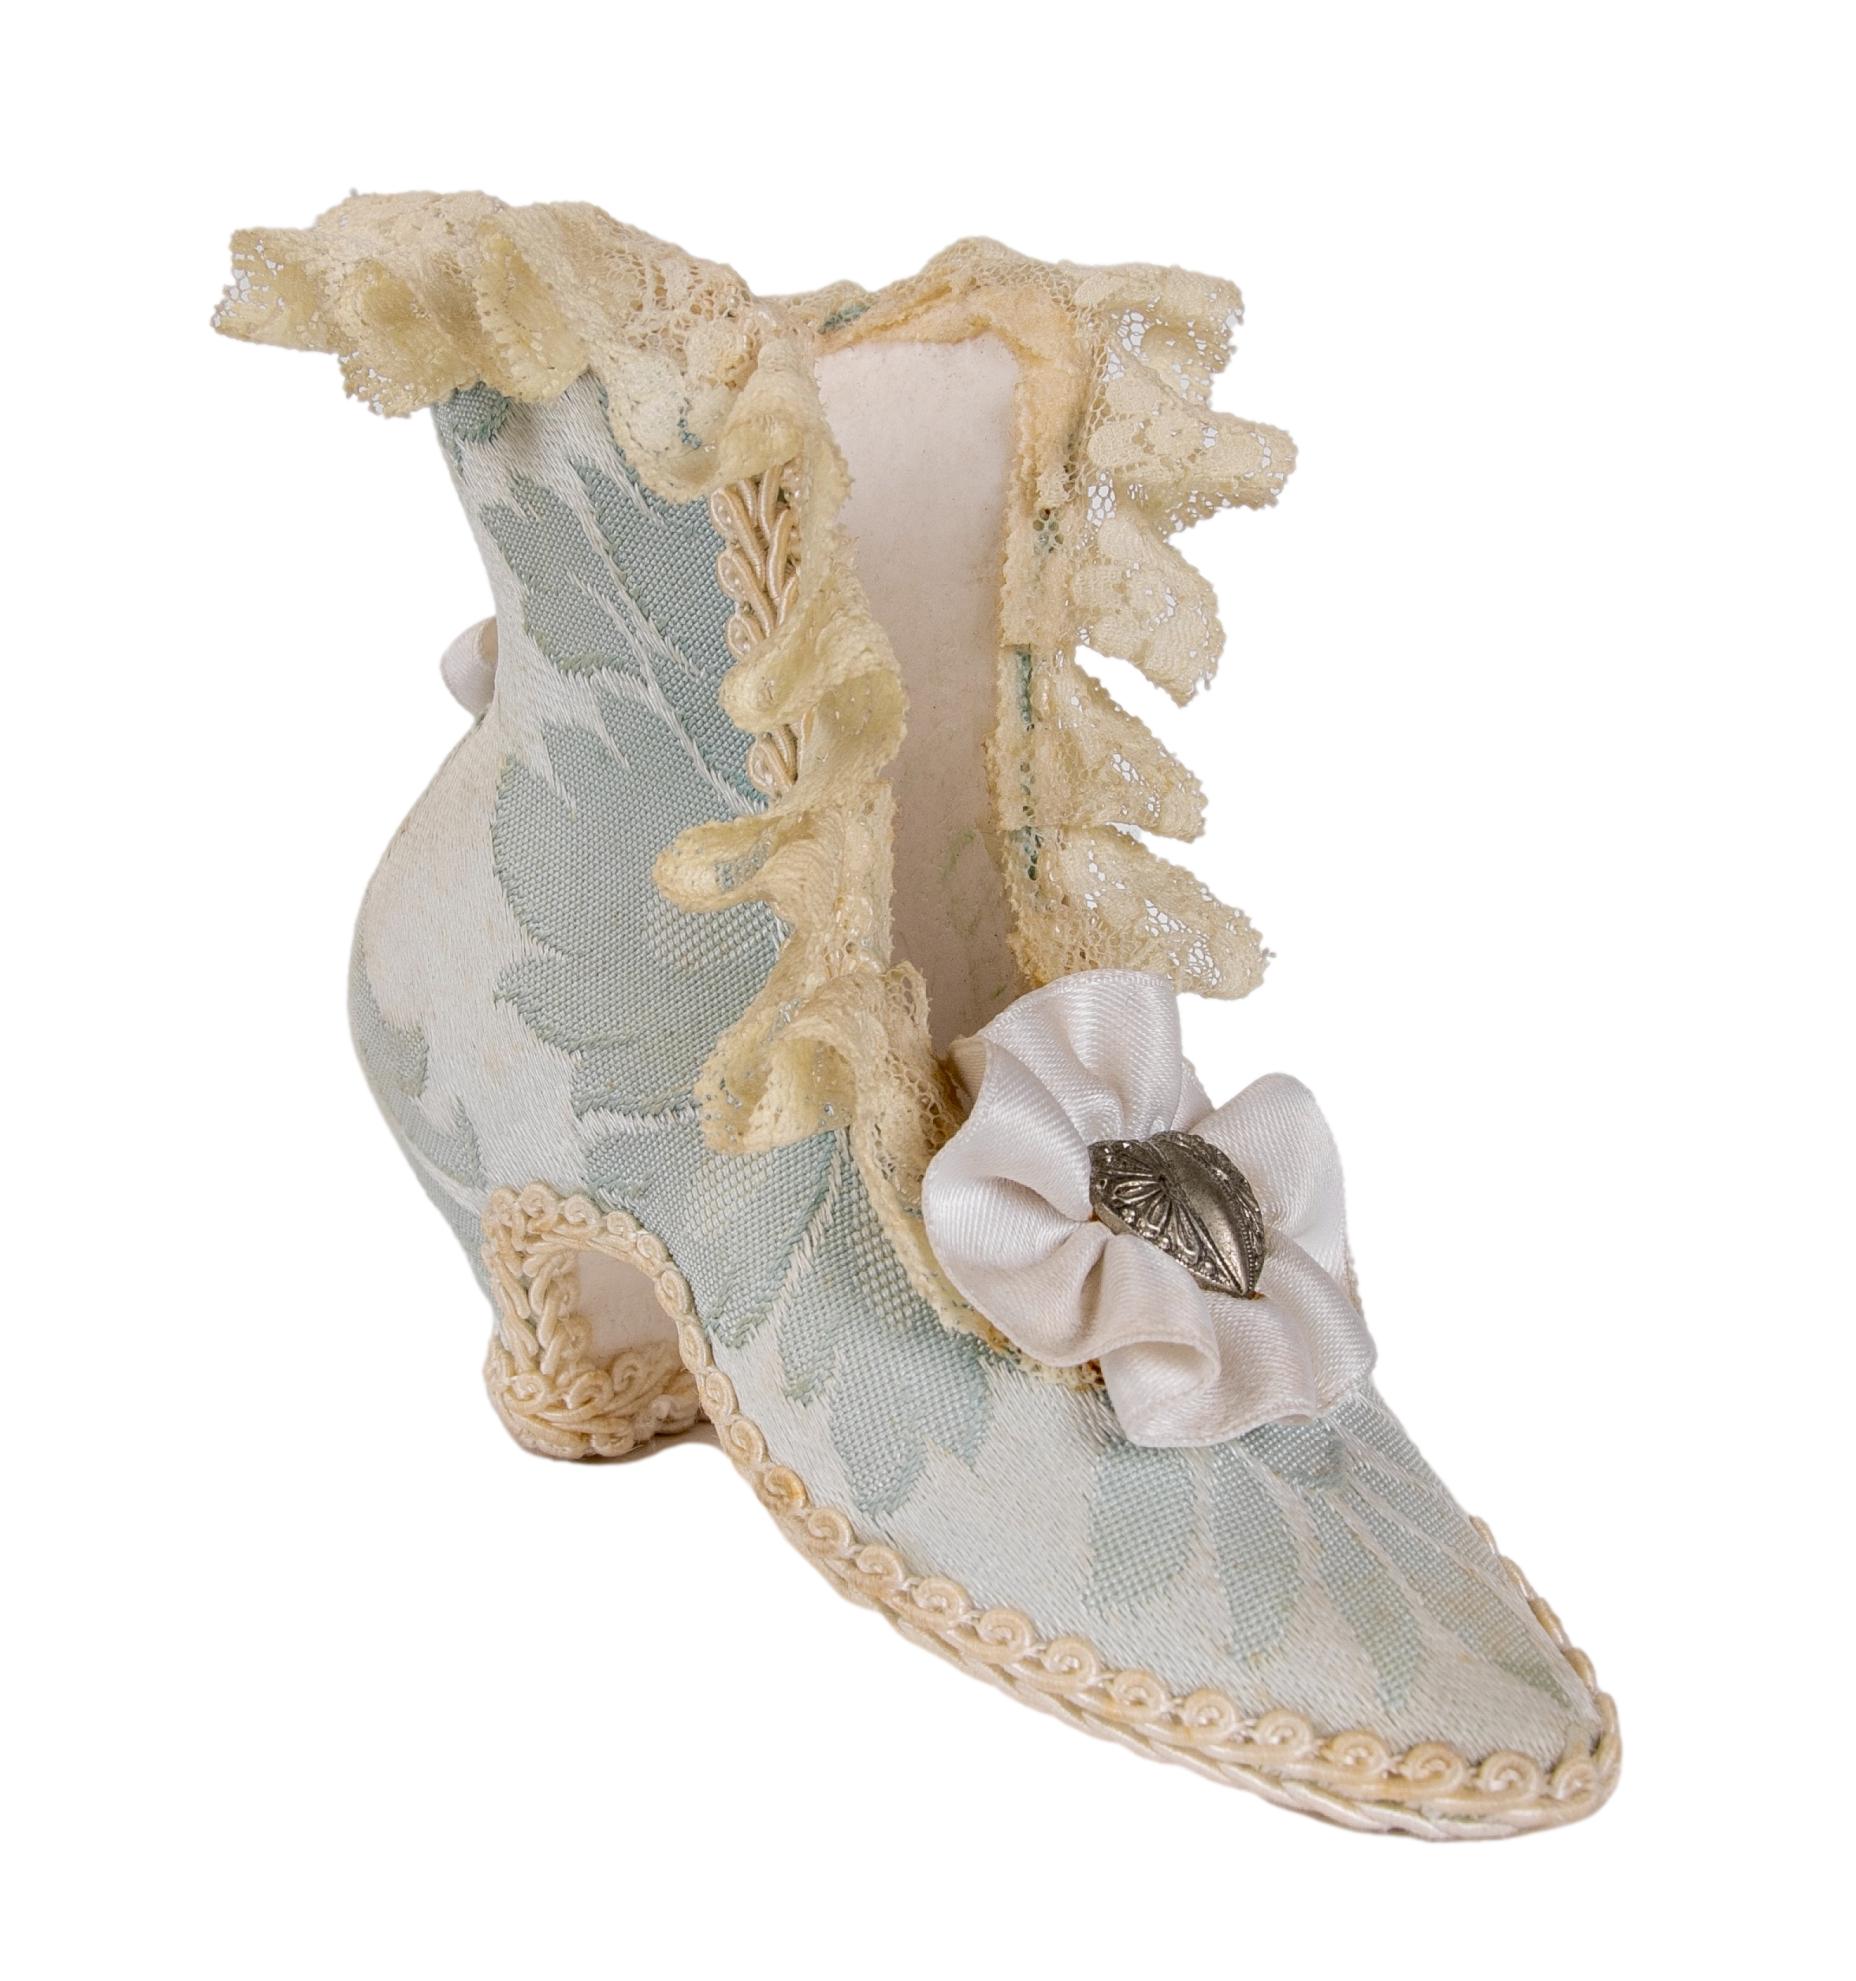 1980s French antique handmade miniature shoe made of silk and fabric
Atelier Jean Claude.